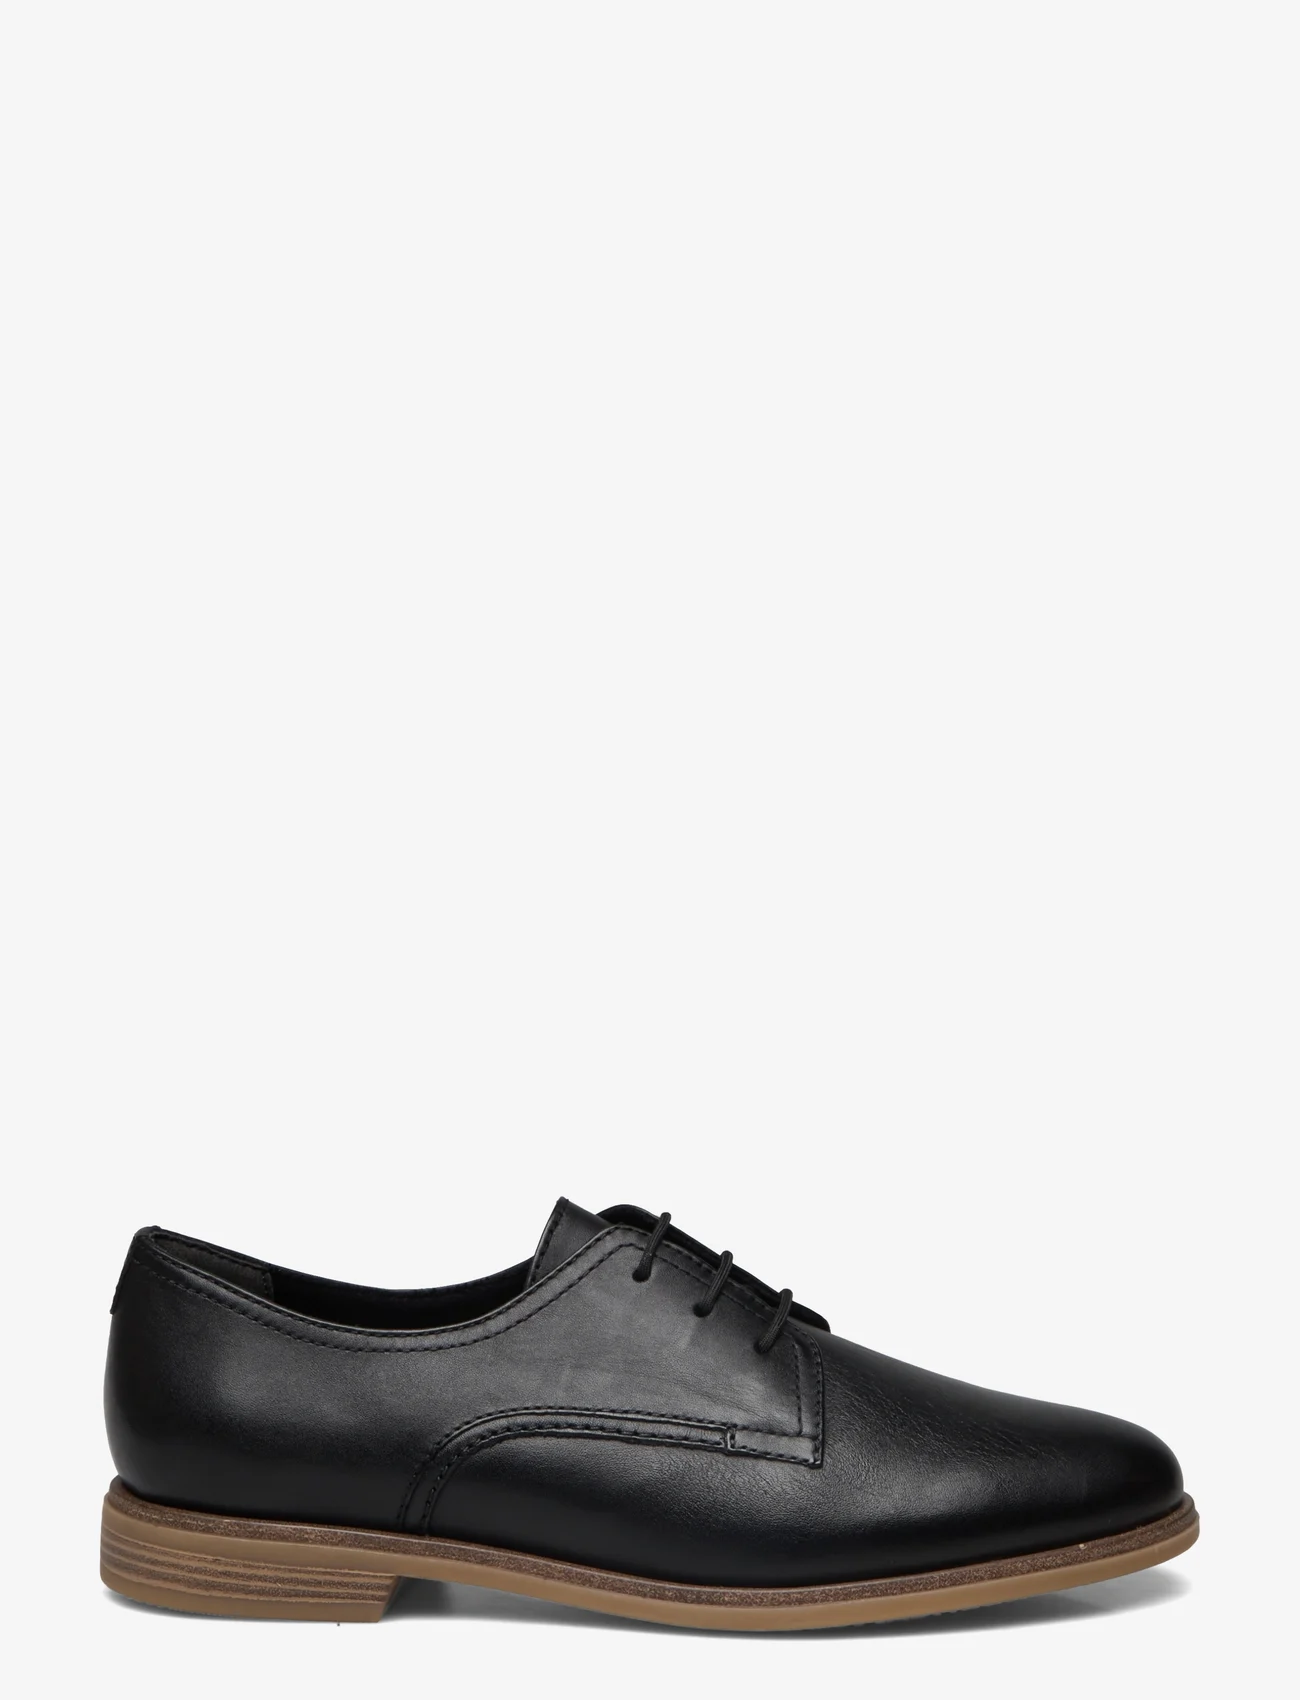 Tamaris - Woms Lace-up - black leather - 1